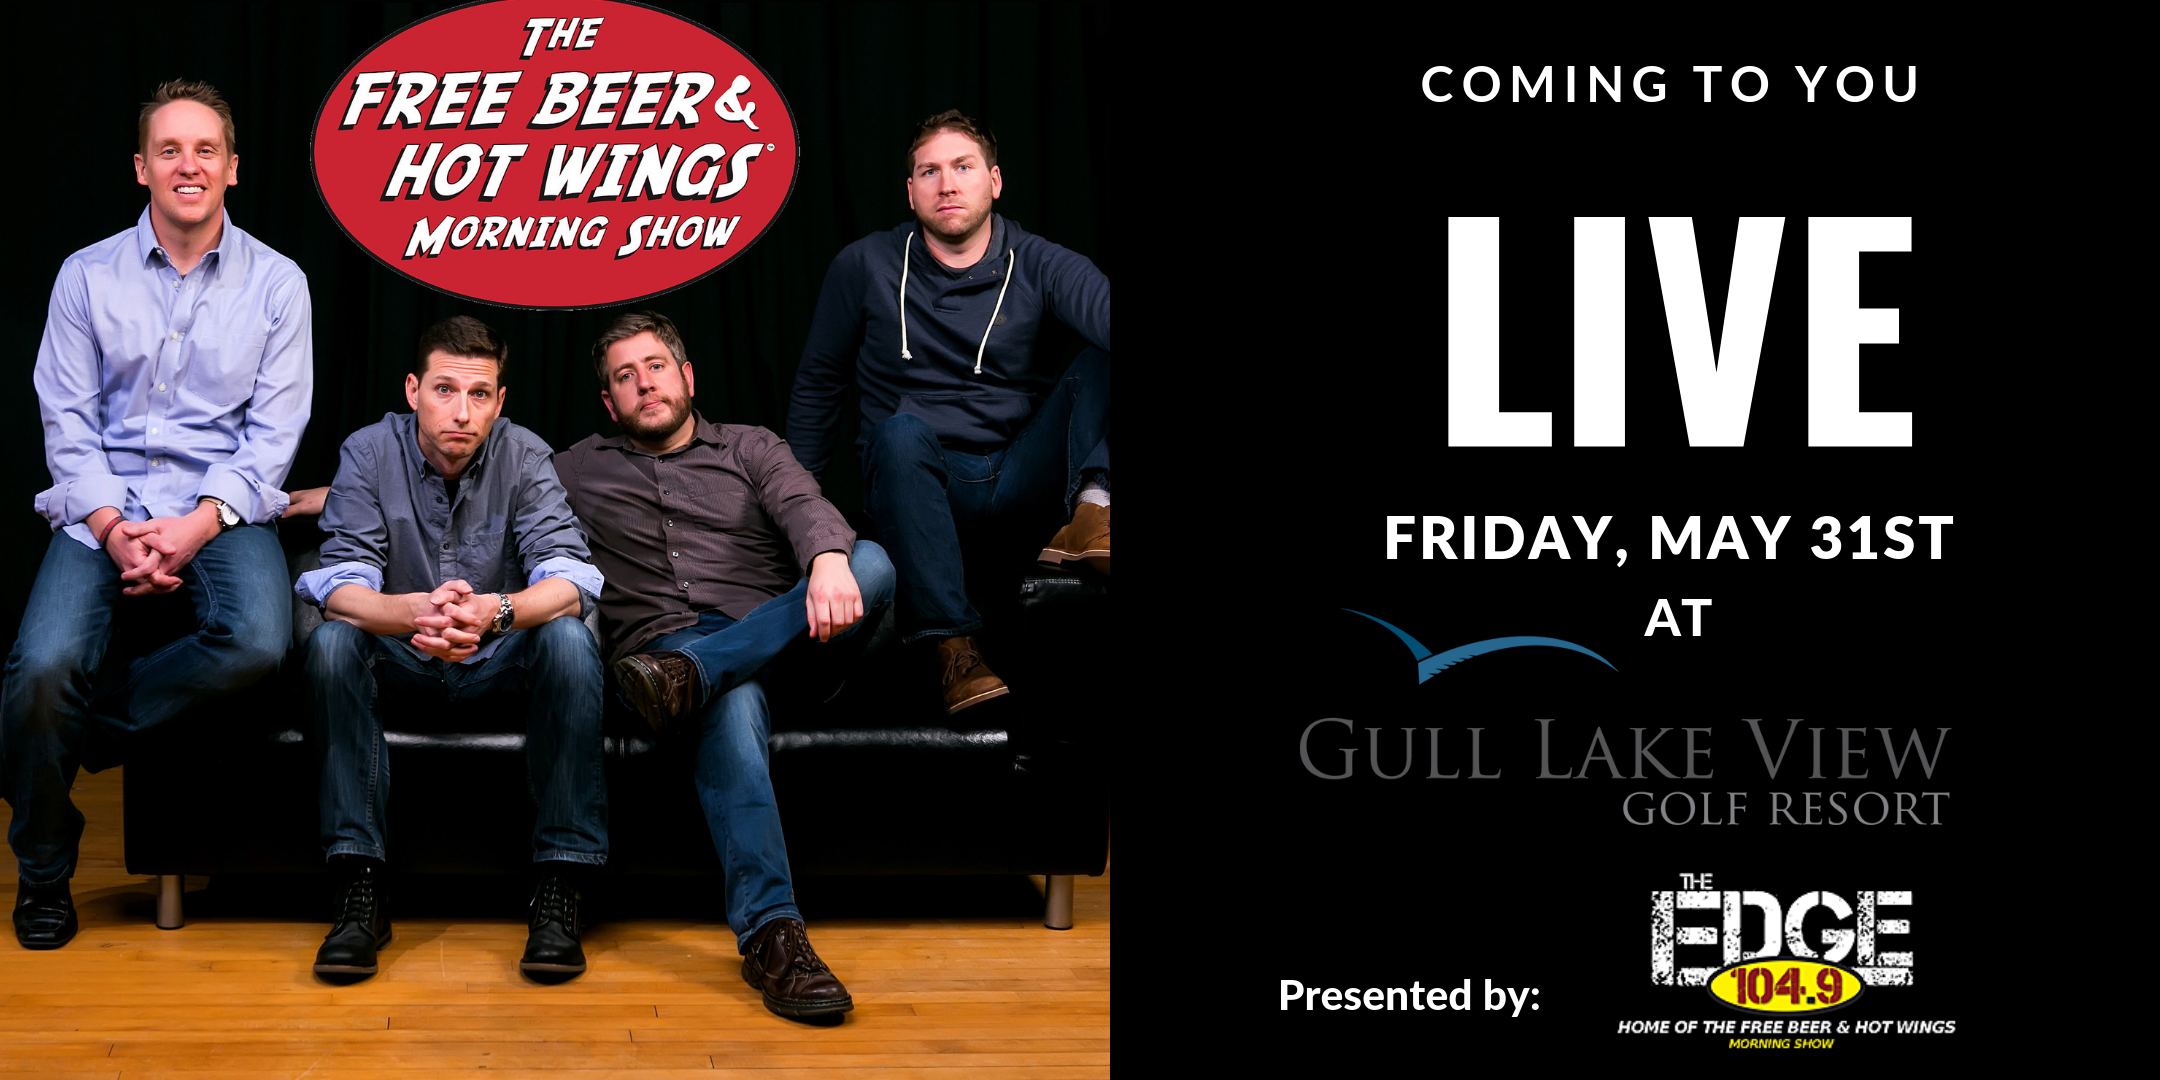 Free Beer and Hot Wings LIVE at Gull Lake View Golf Resort